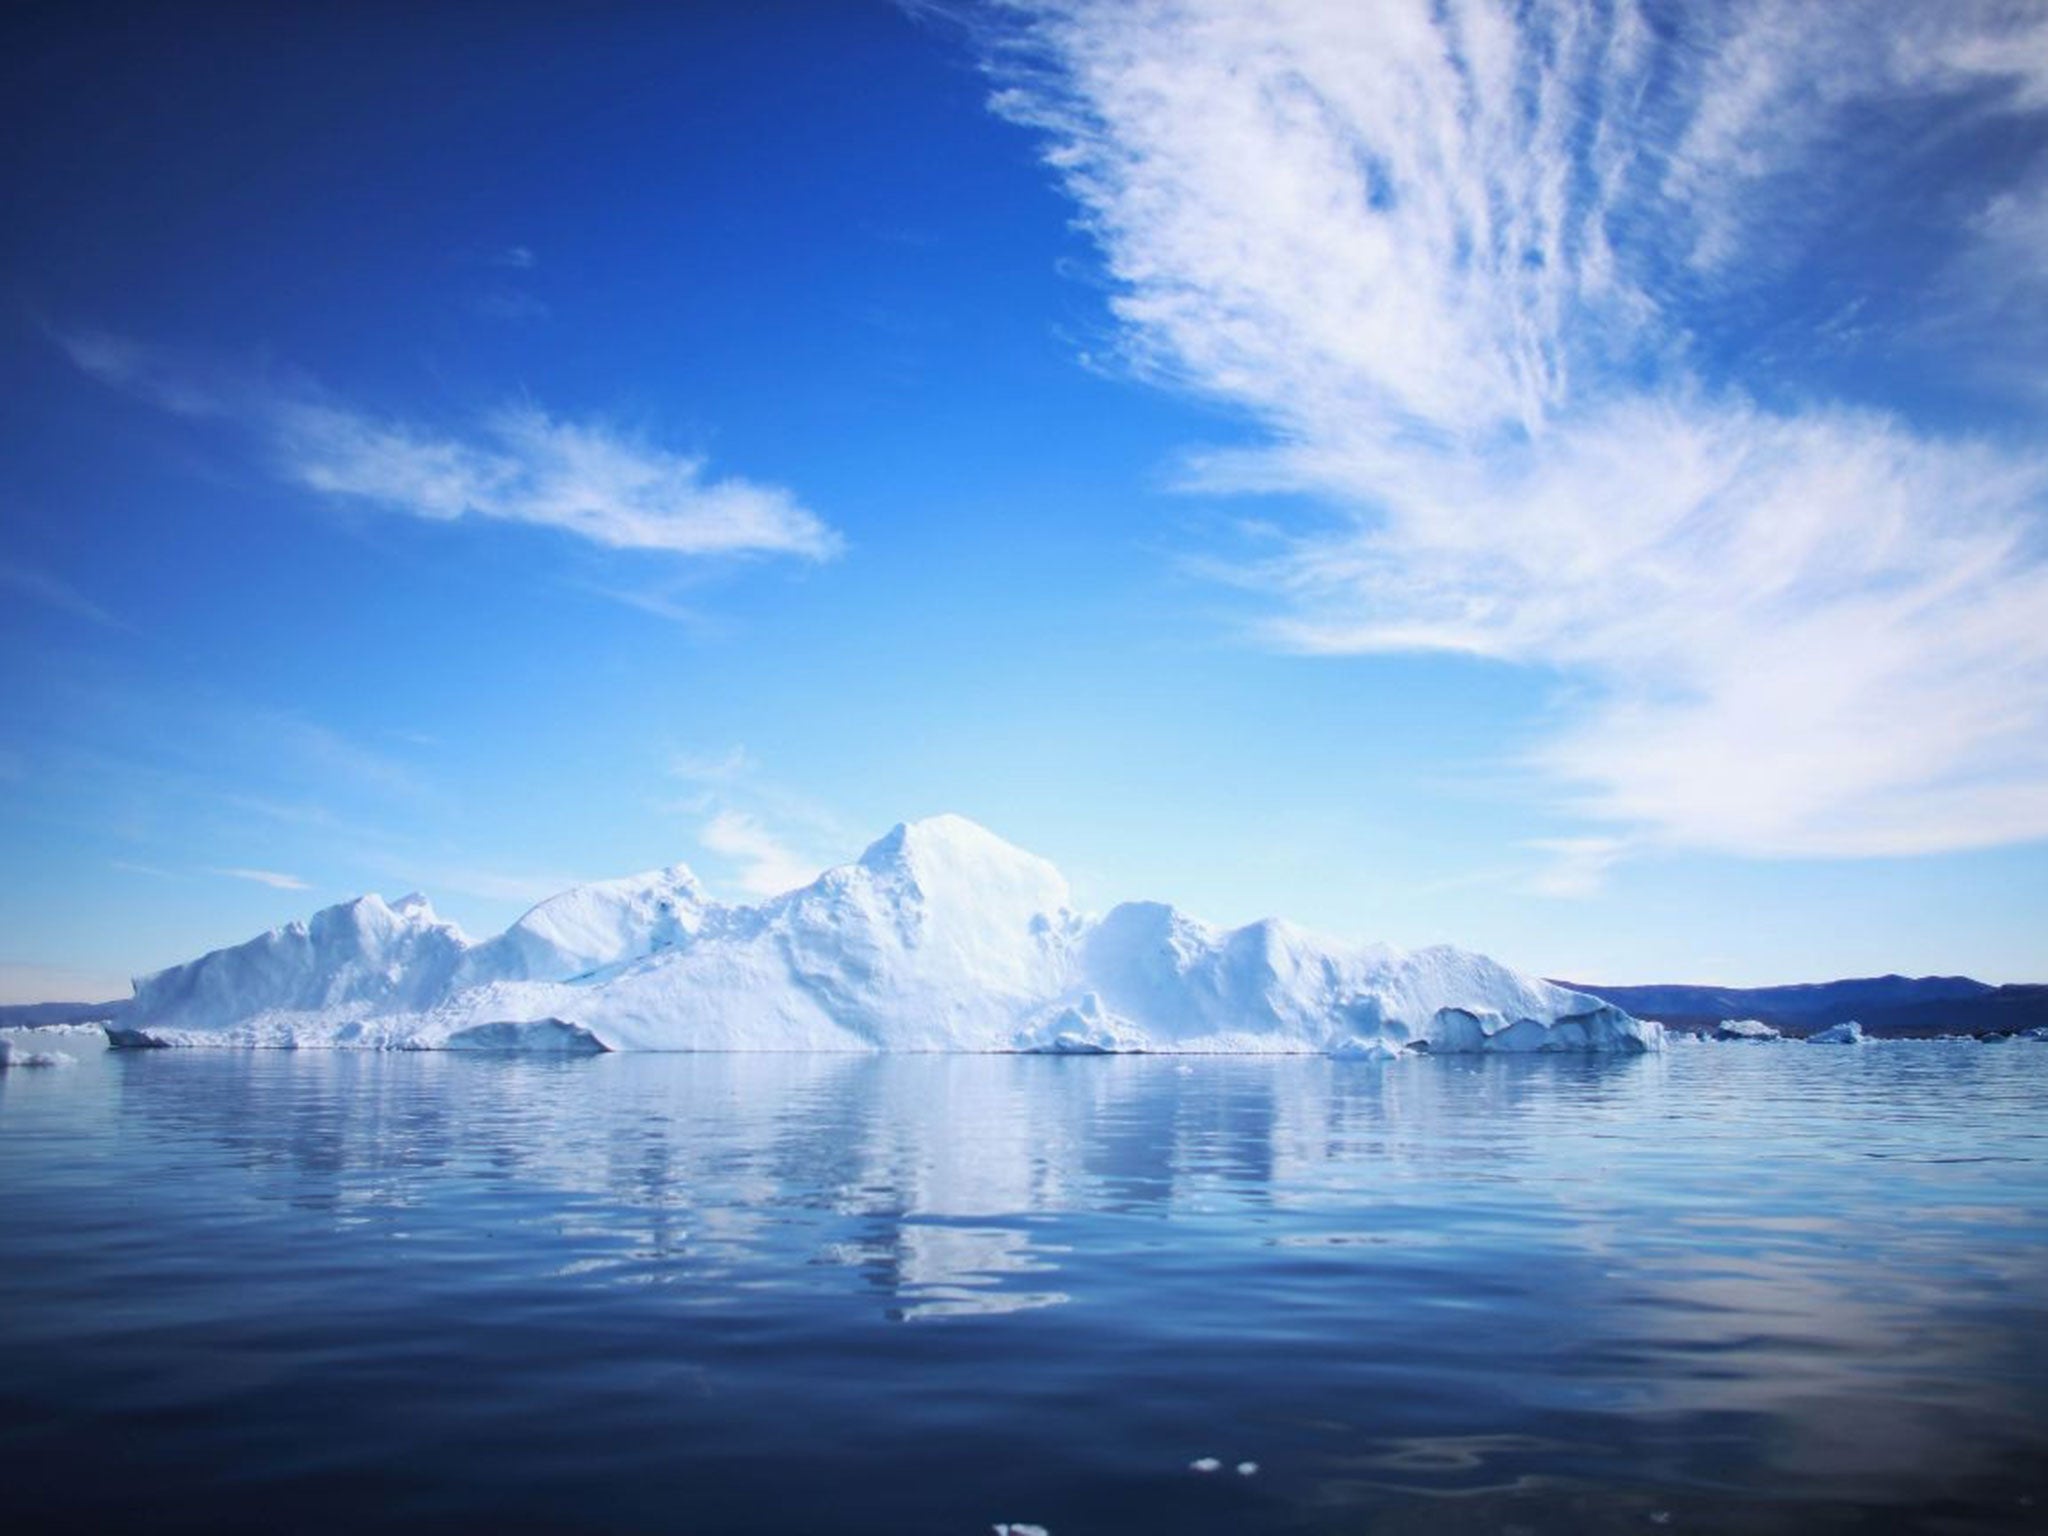 Climate Crisis: The latest research suggests that melting ice sheets could raise sea levels by nearly half a meter in 80 years